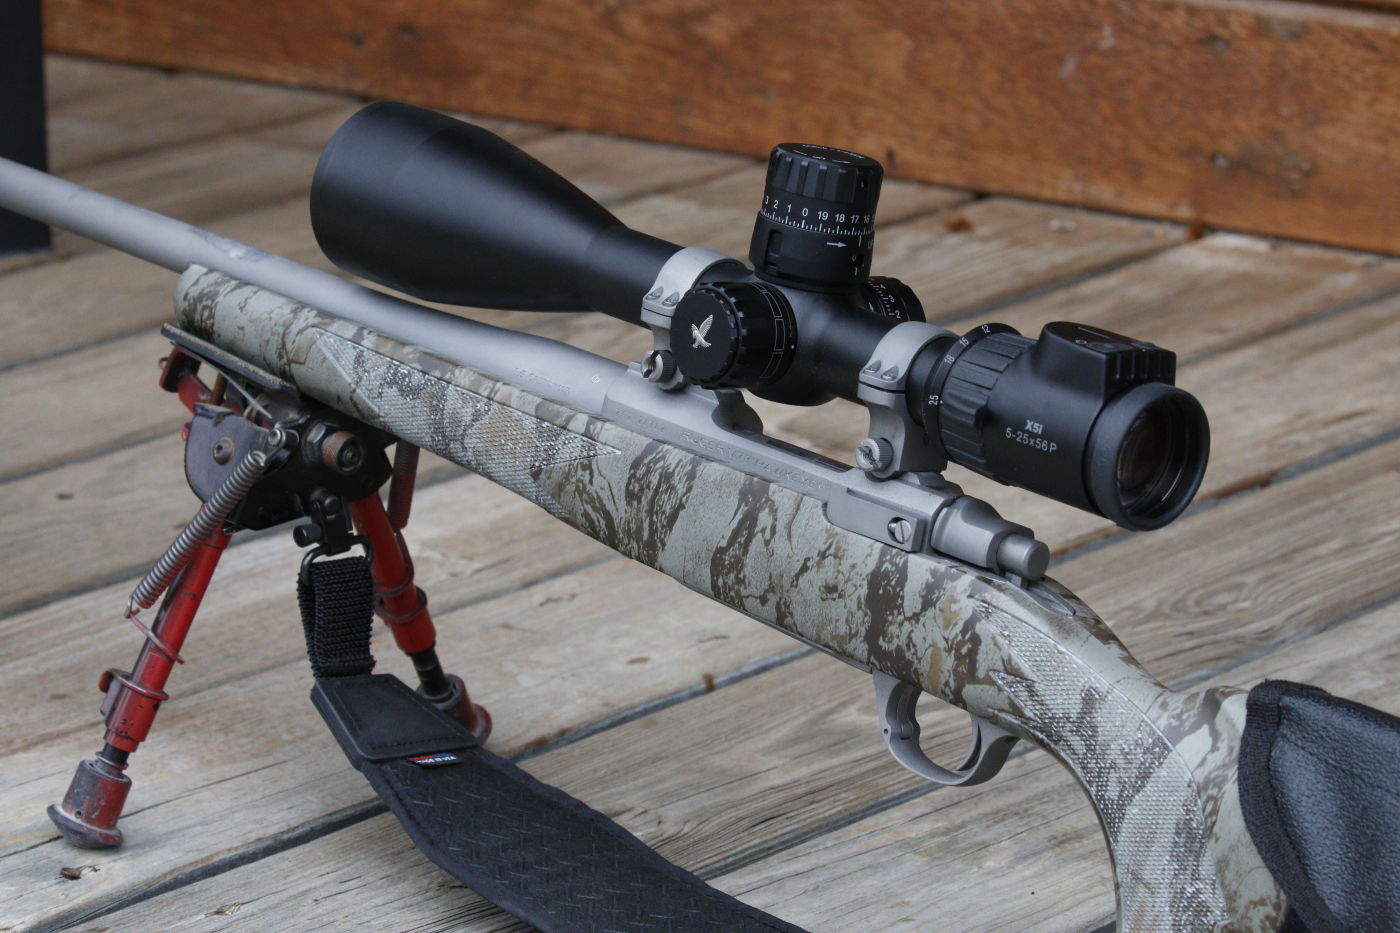 The difference between “call the taxidermist” and “maybe next year” - SWAROVSKI OPTIK X5i